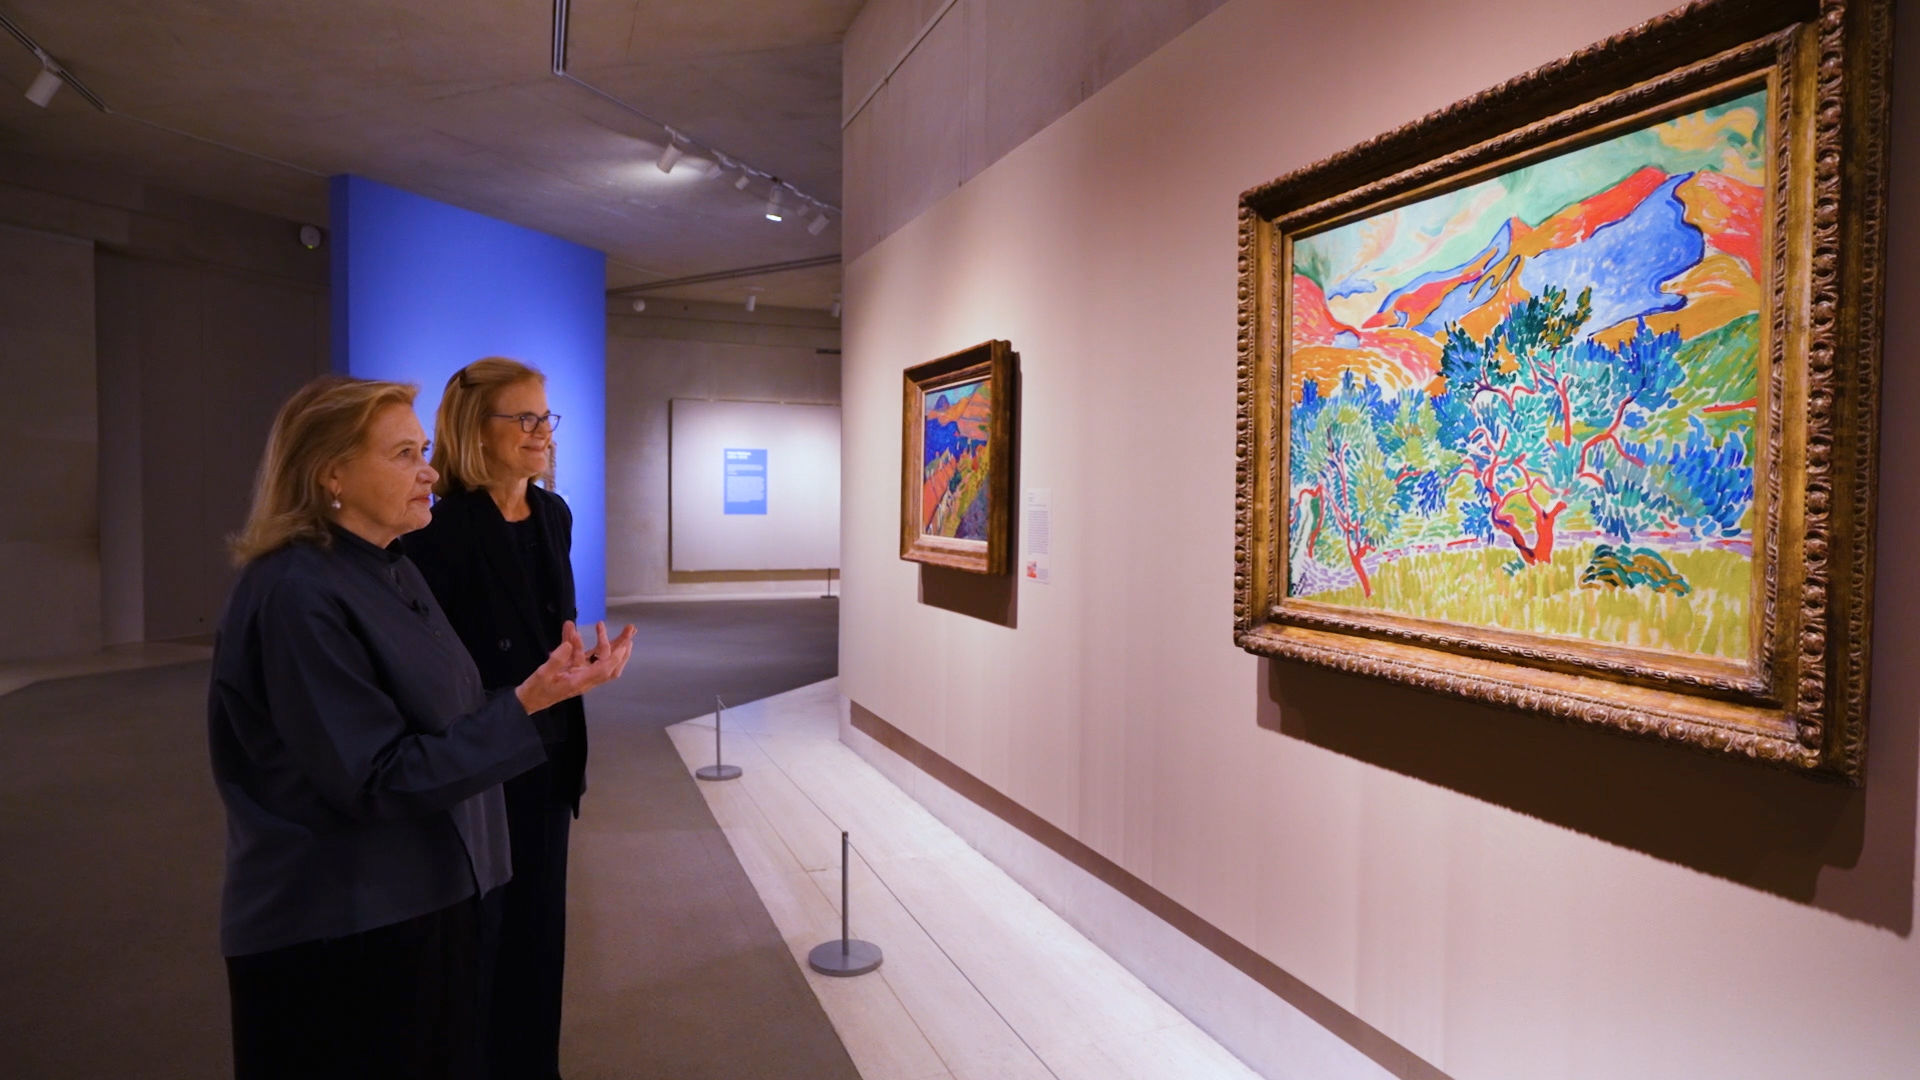 Two women in conversation with each other stand before a colorful landscape painting in a gold frame.